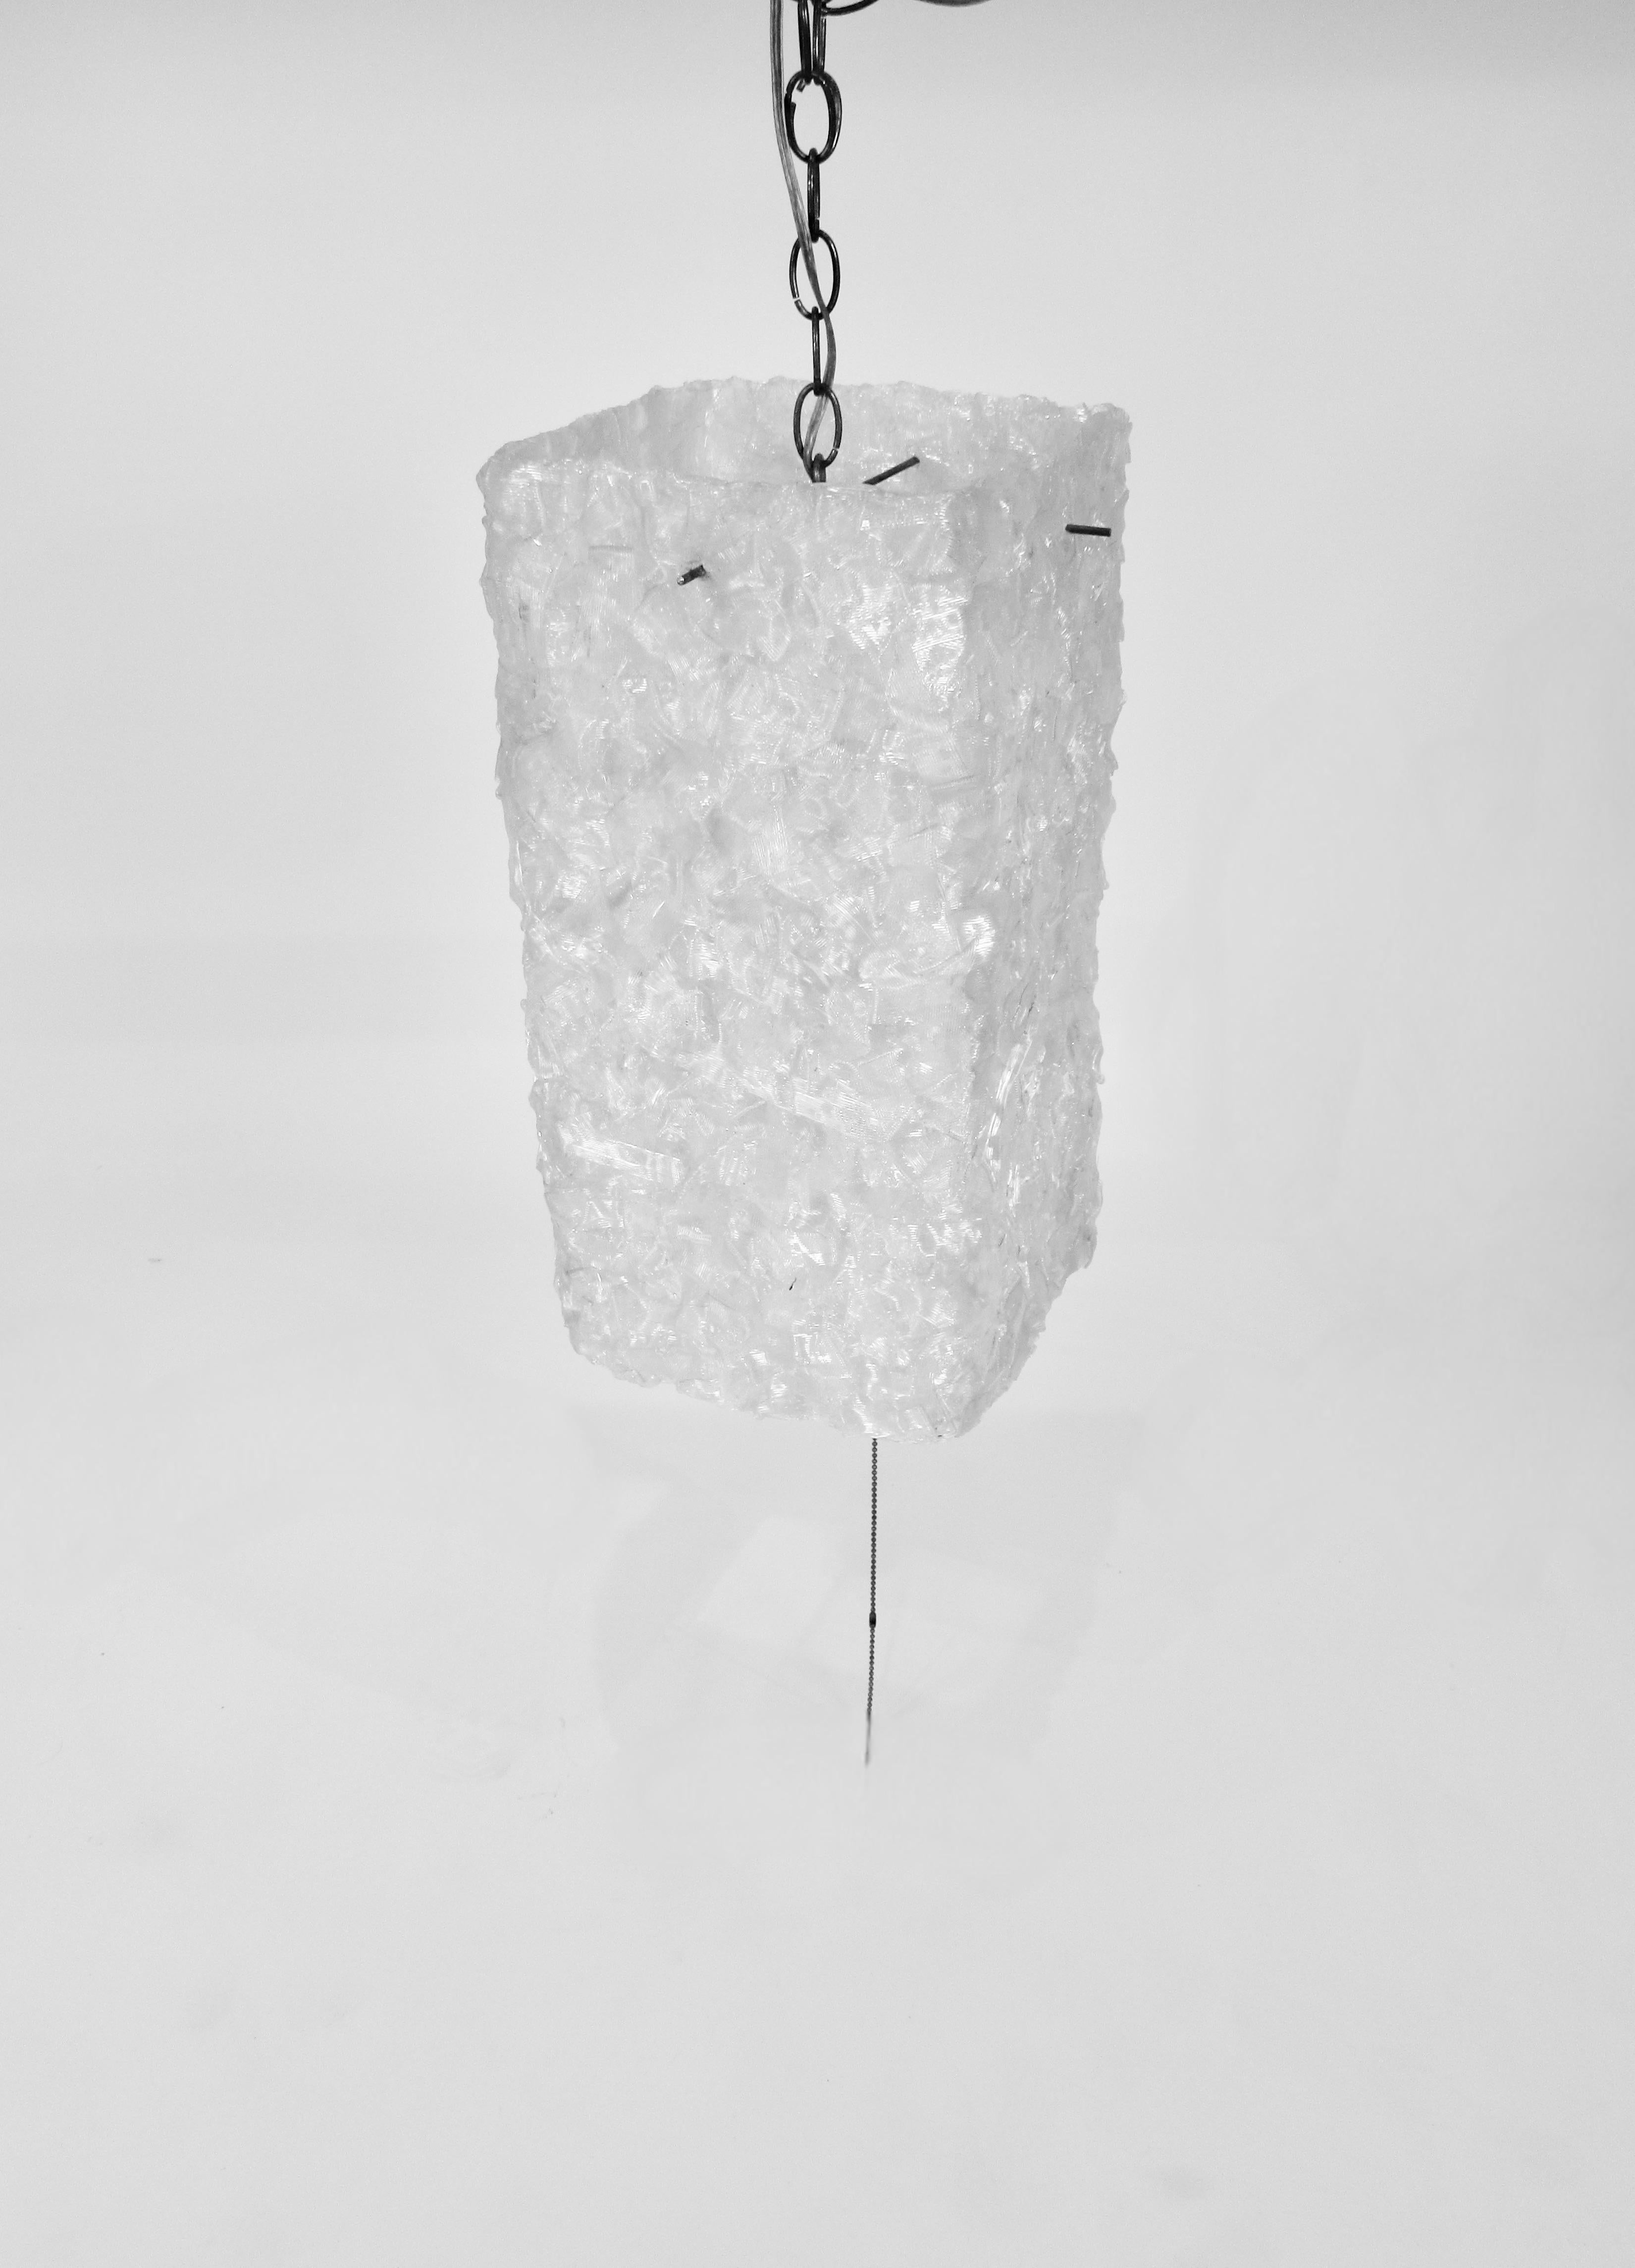 Pressed ribbons of white plastic form this tall rectangular hanging lamp. Currently plugs into a socket to hang straight or as a swag lamp. Could easily be hardwired if need be.